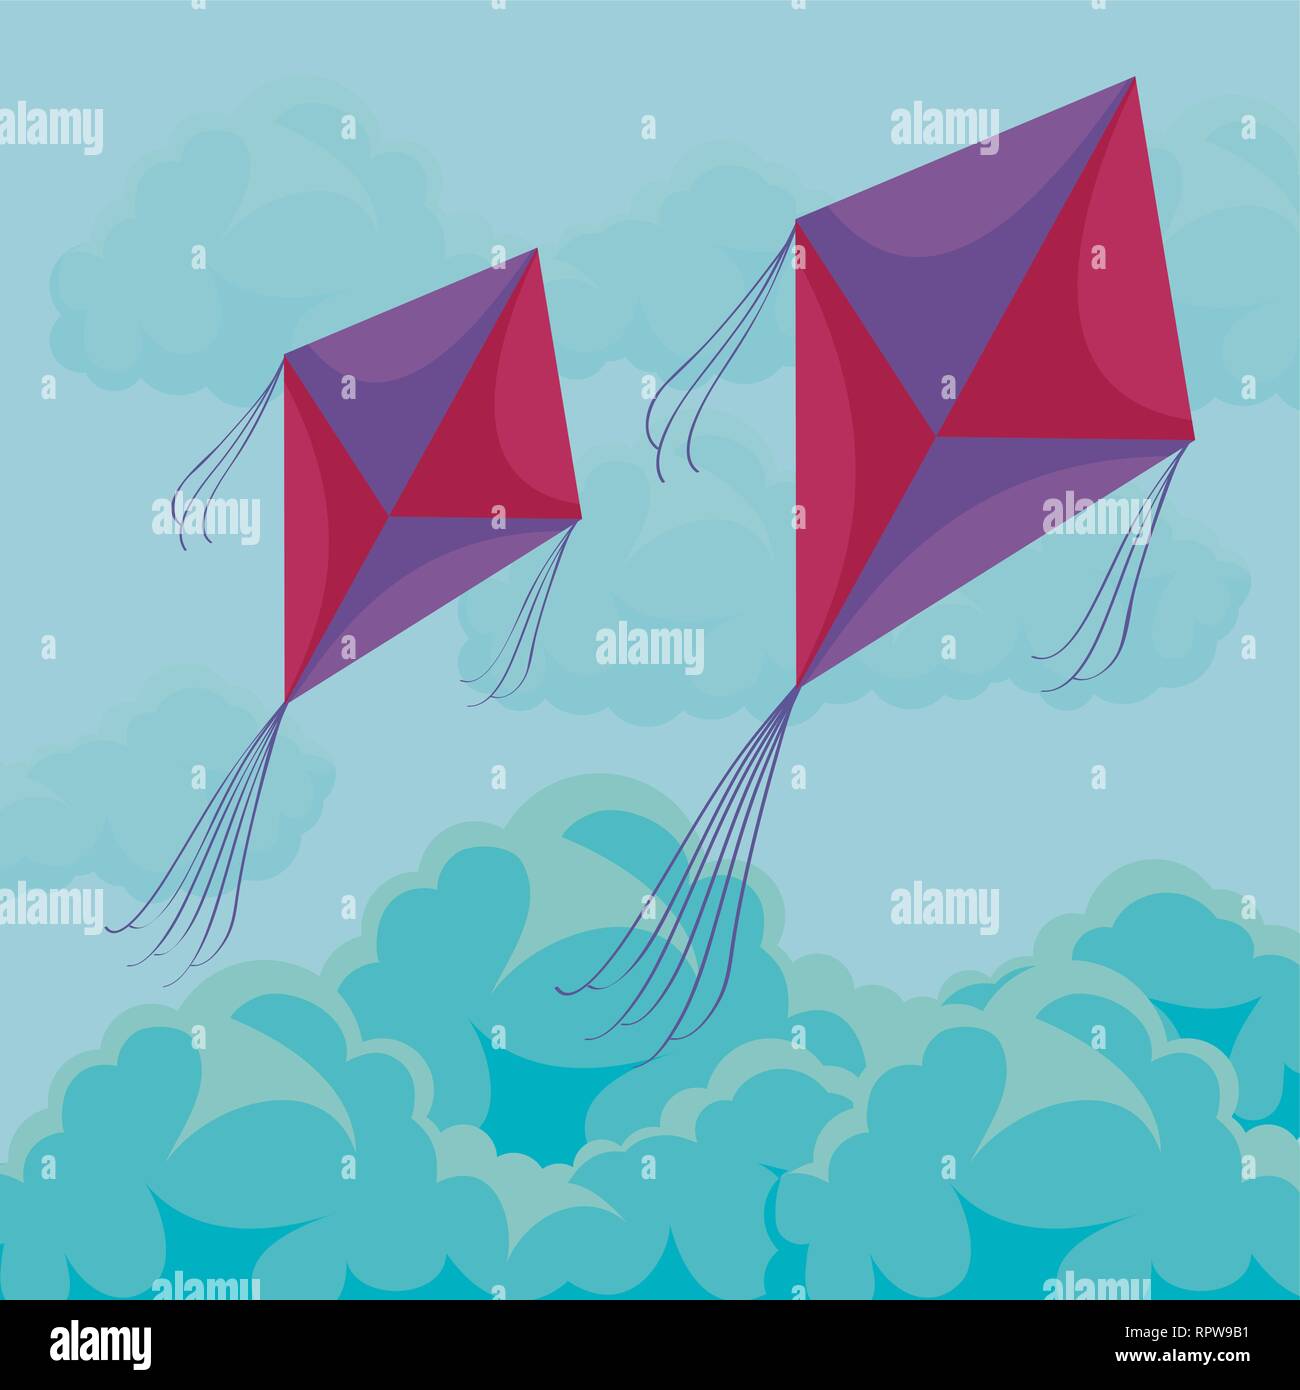 kites flying in the sky animated